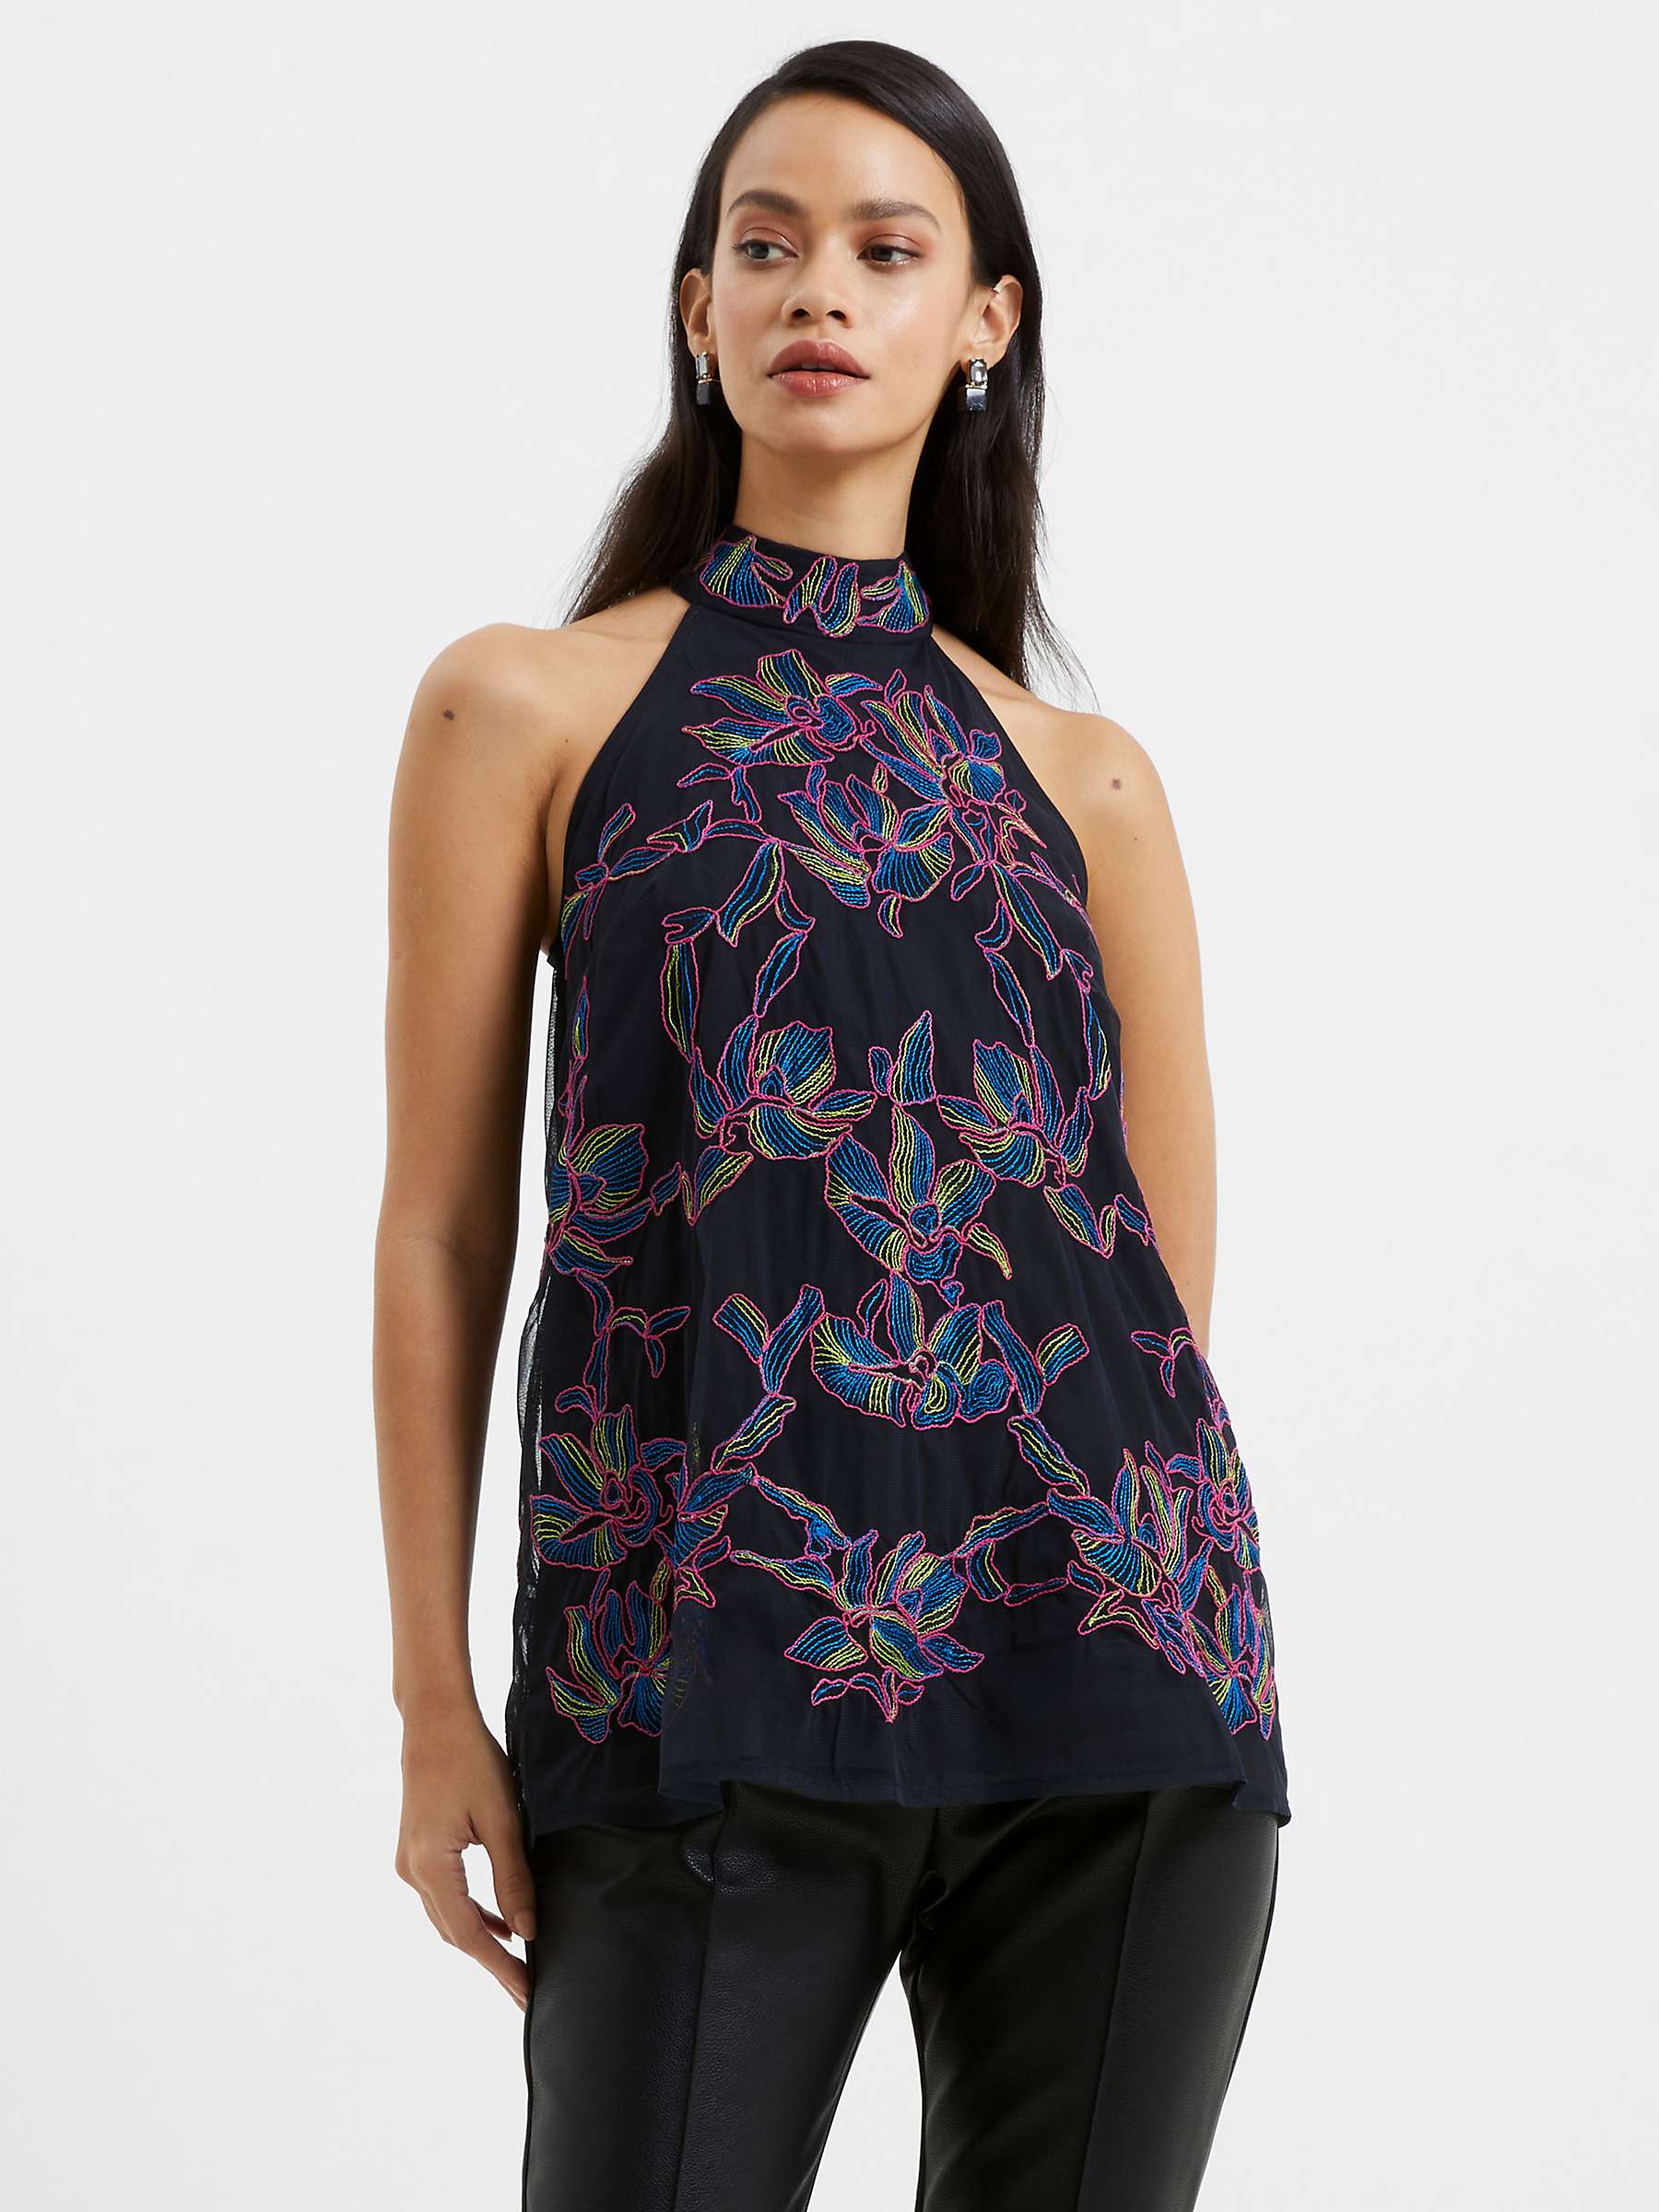 Buy French Connection Emilia Embroidered Top, Black/Multi Online at johnlewis.com